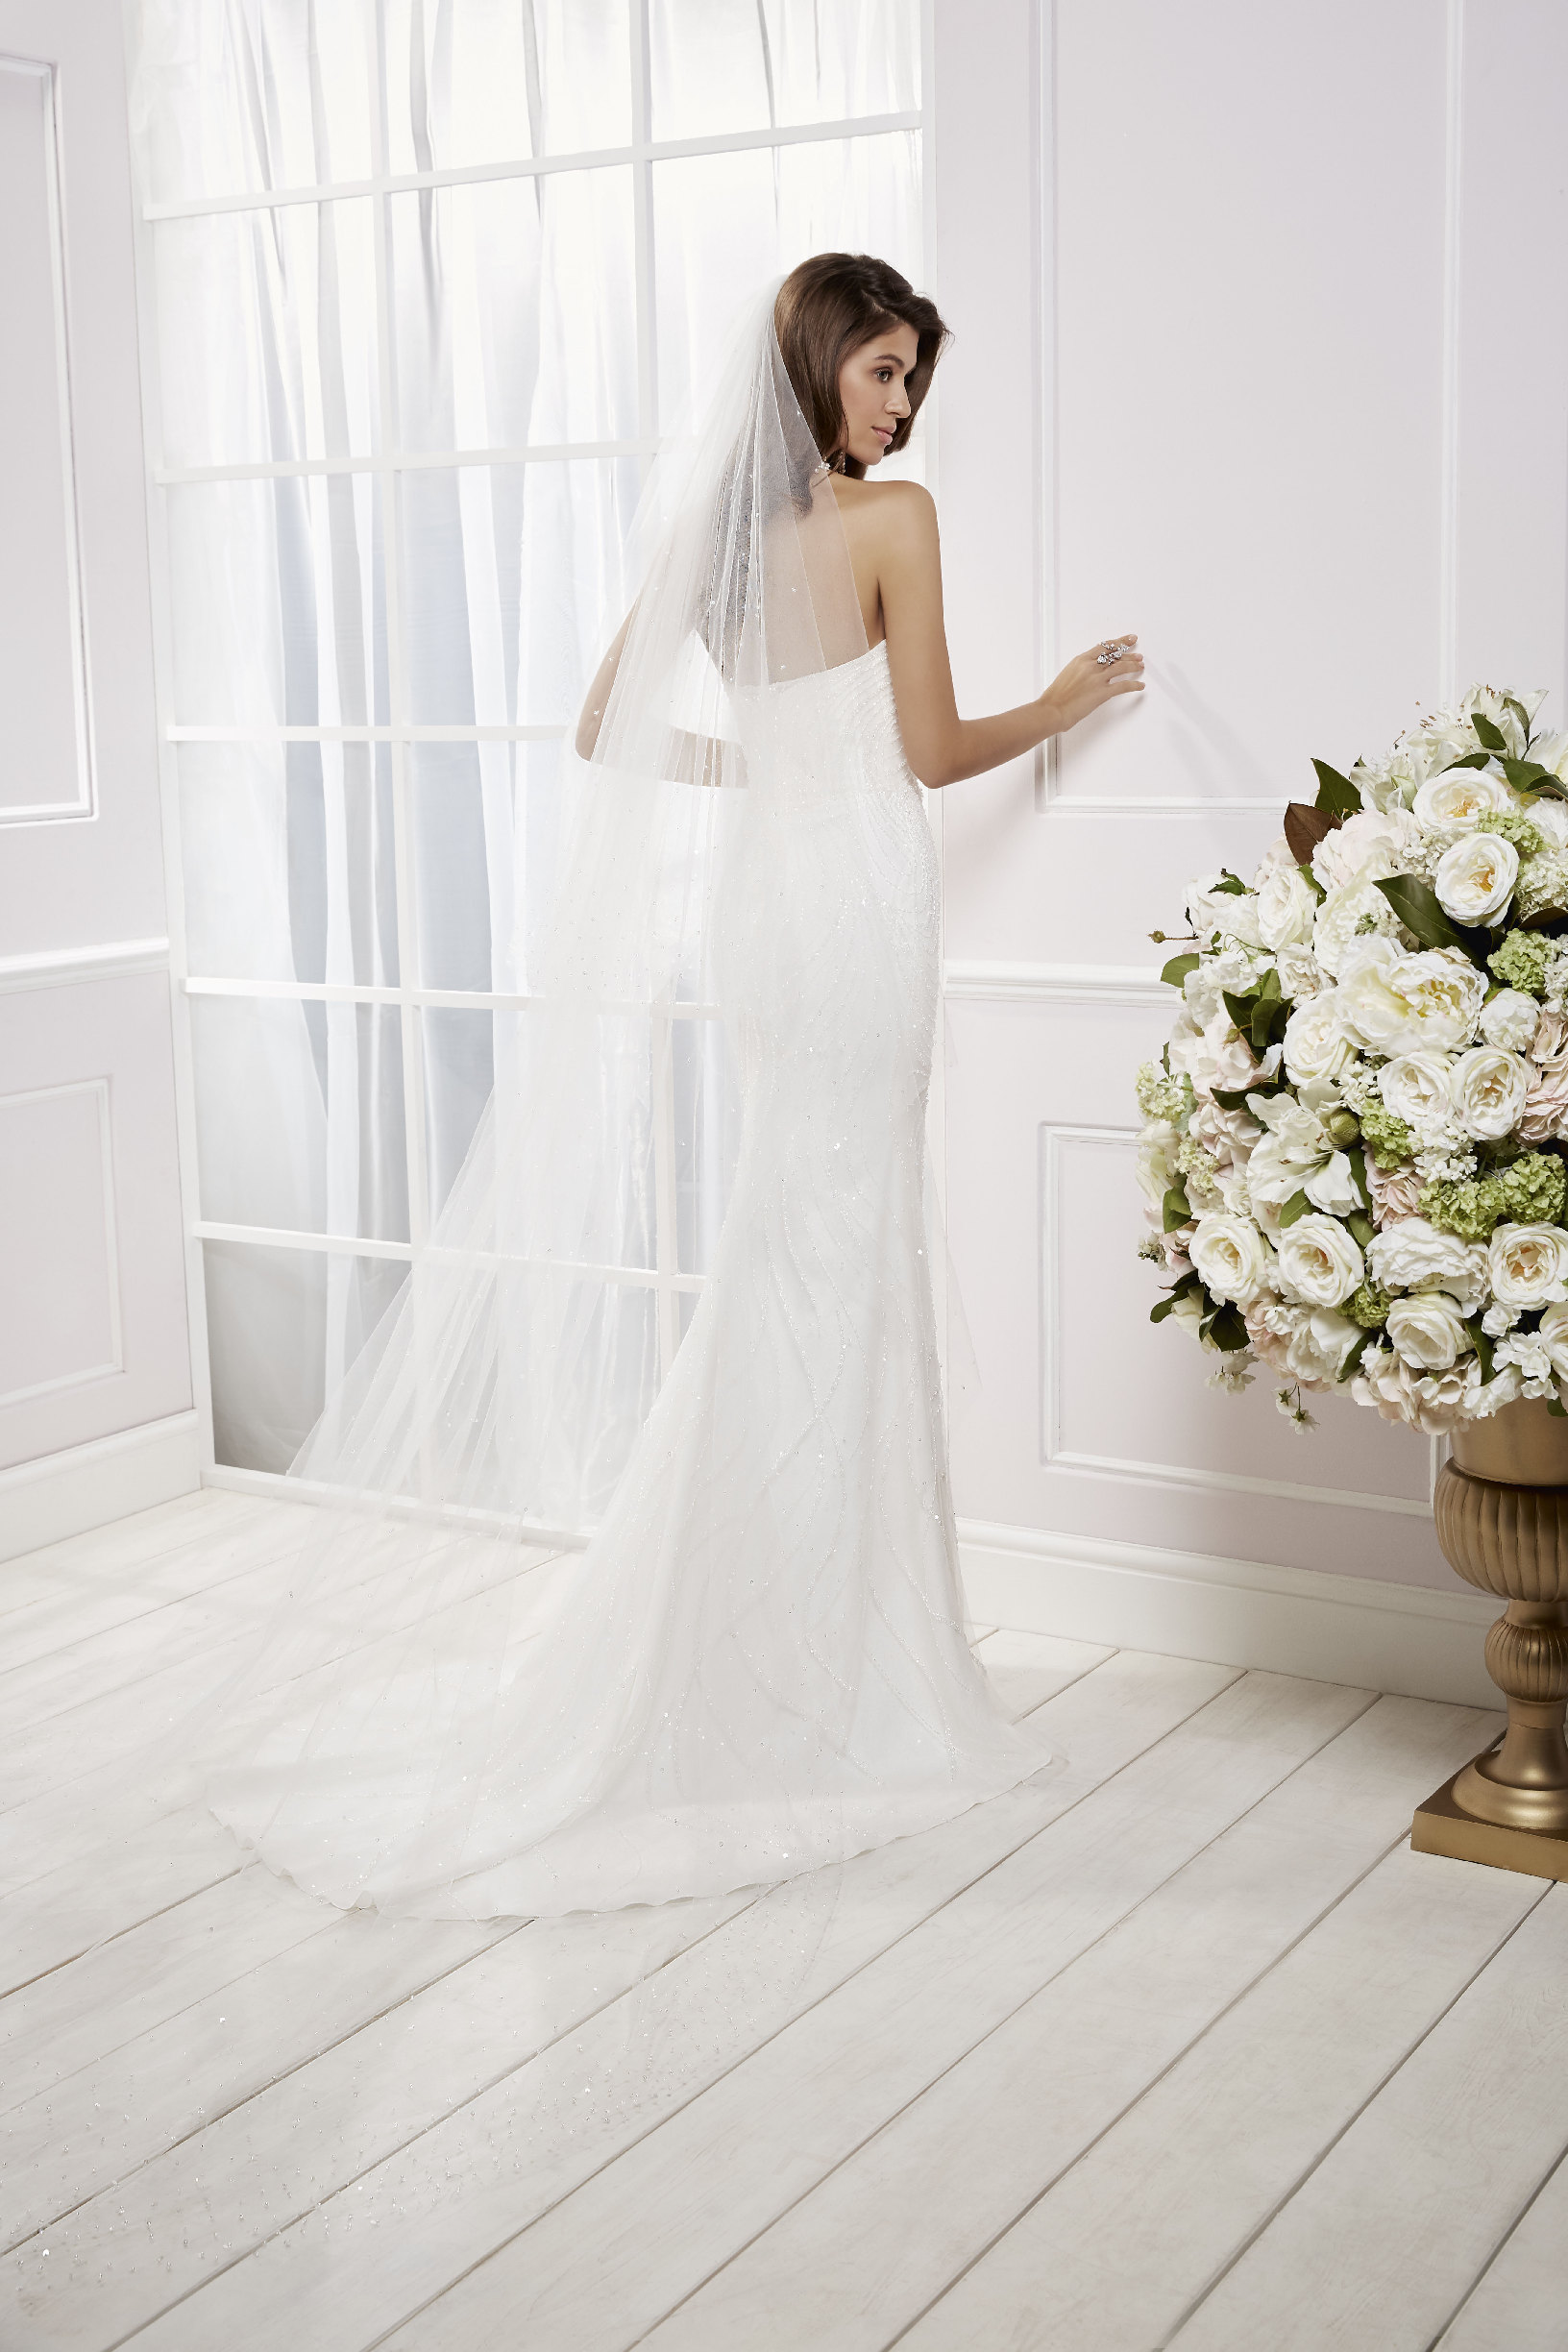 Back image of lady standing in front of window wearing fit and flare wedding dress with floor length bridal veil 